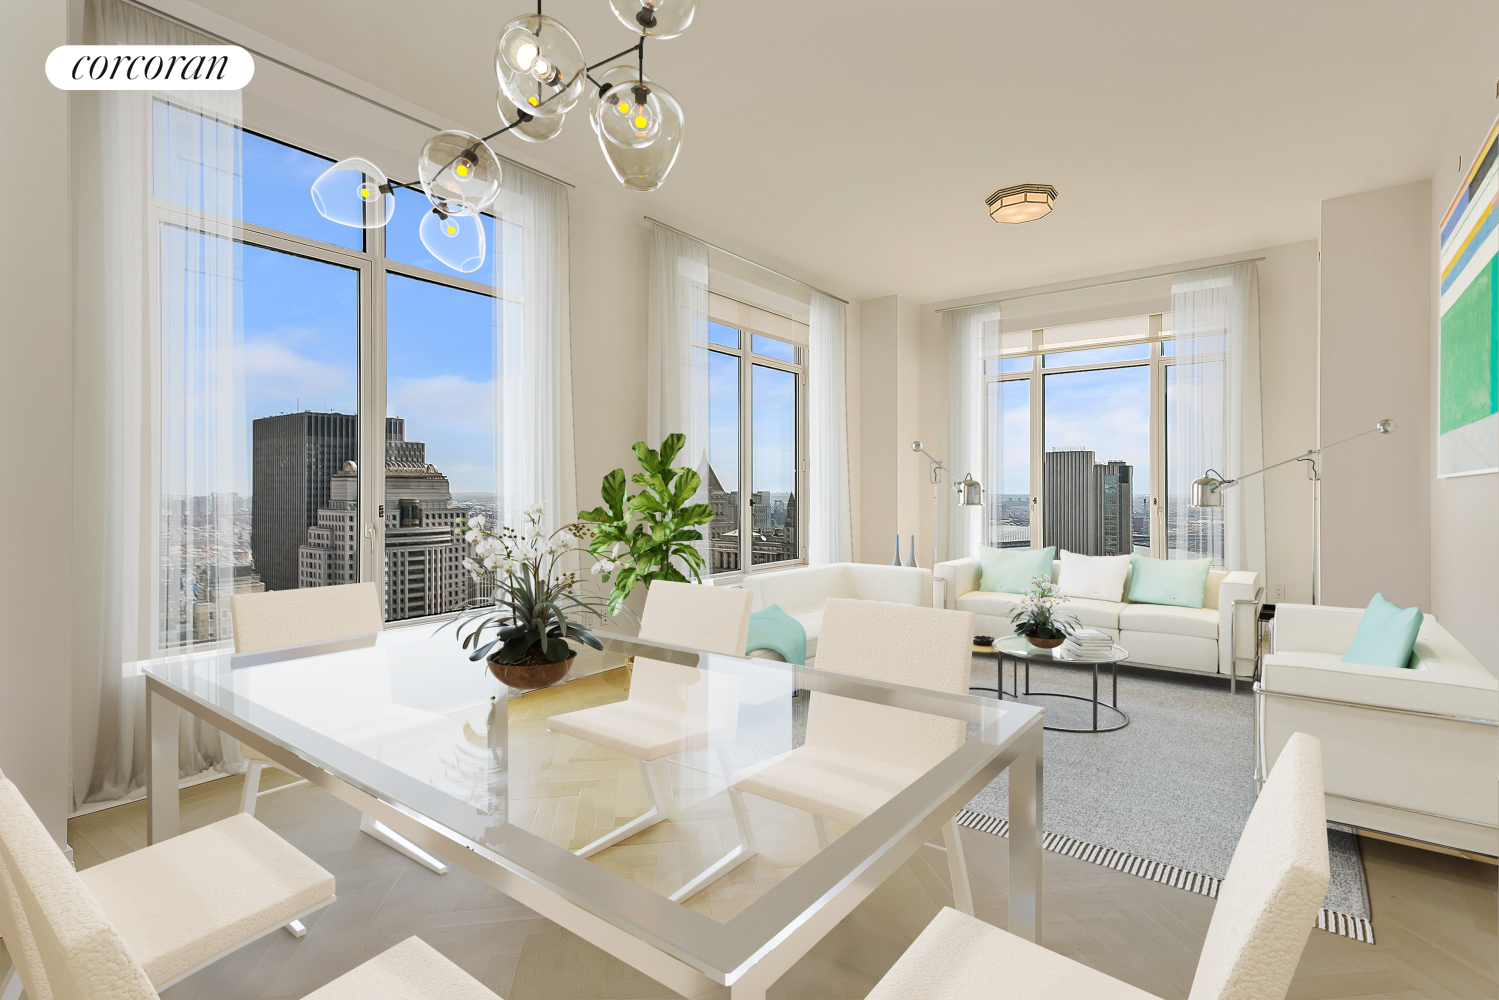 30 Park Place 50B, Tribeca, Downtown, NYC - 2 Bedrooms  
2.5 Bathrooms  
4 Rooms - 